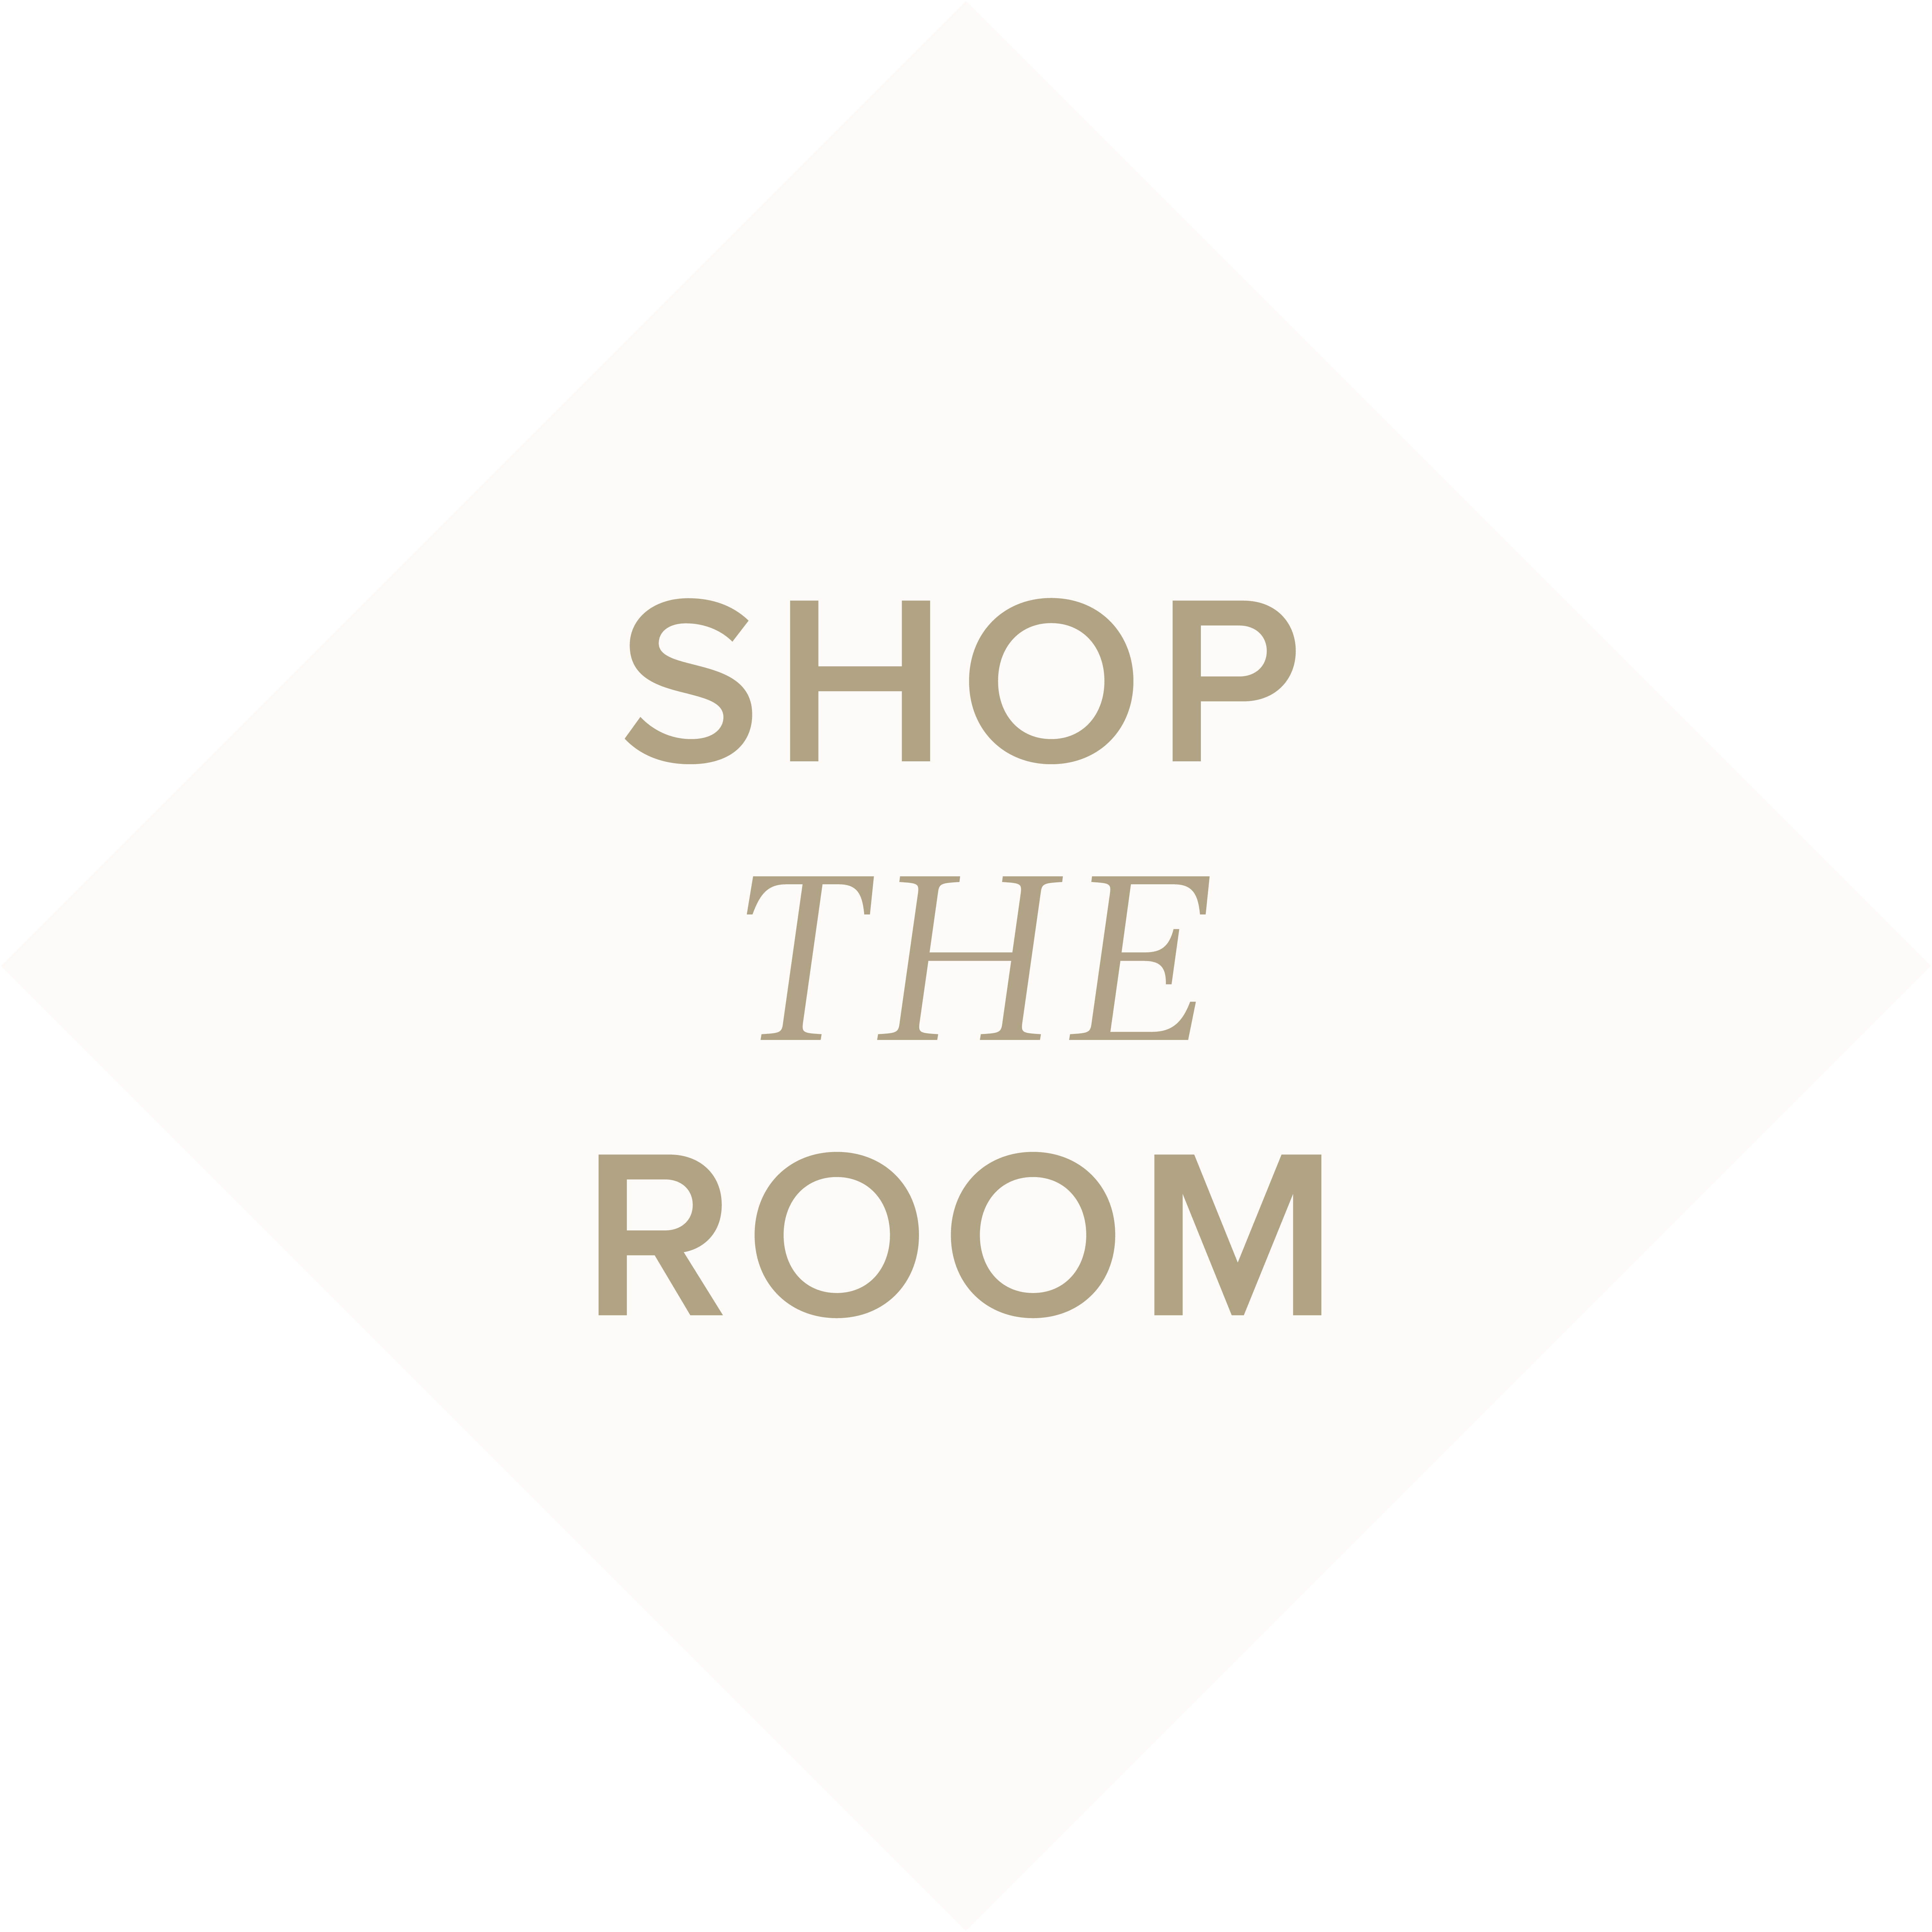 series shop the room